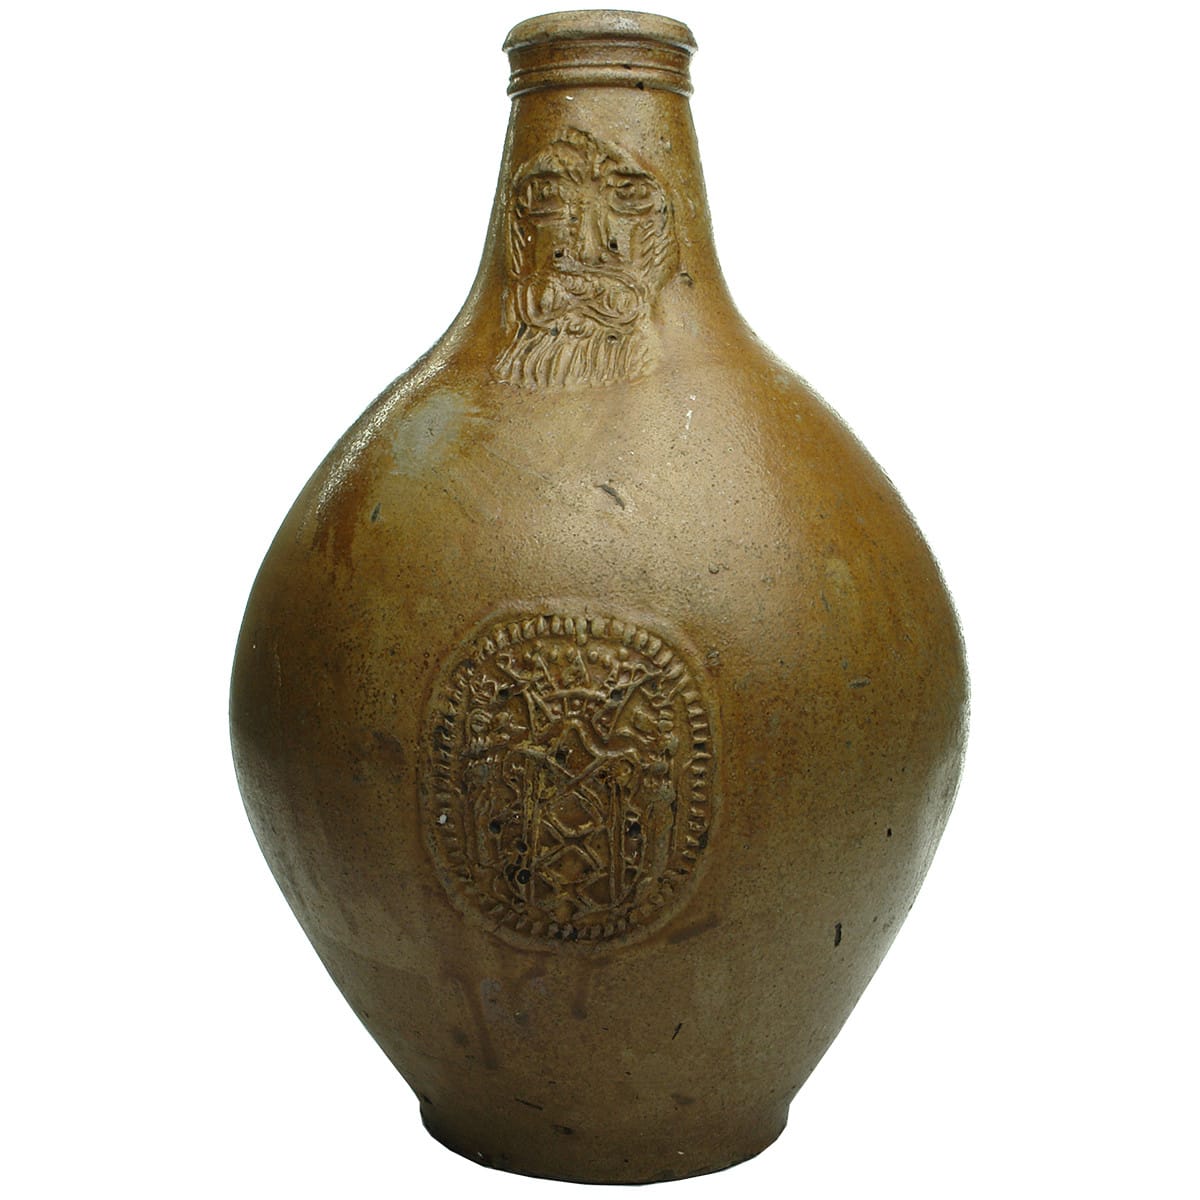 Early Pottery. Large Bellarmine with Amsterdam Coat of Arms. (Netherlands)